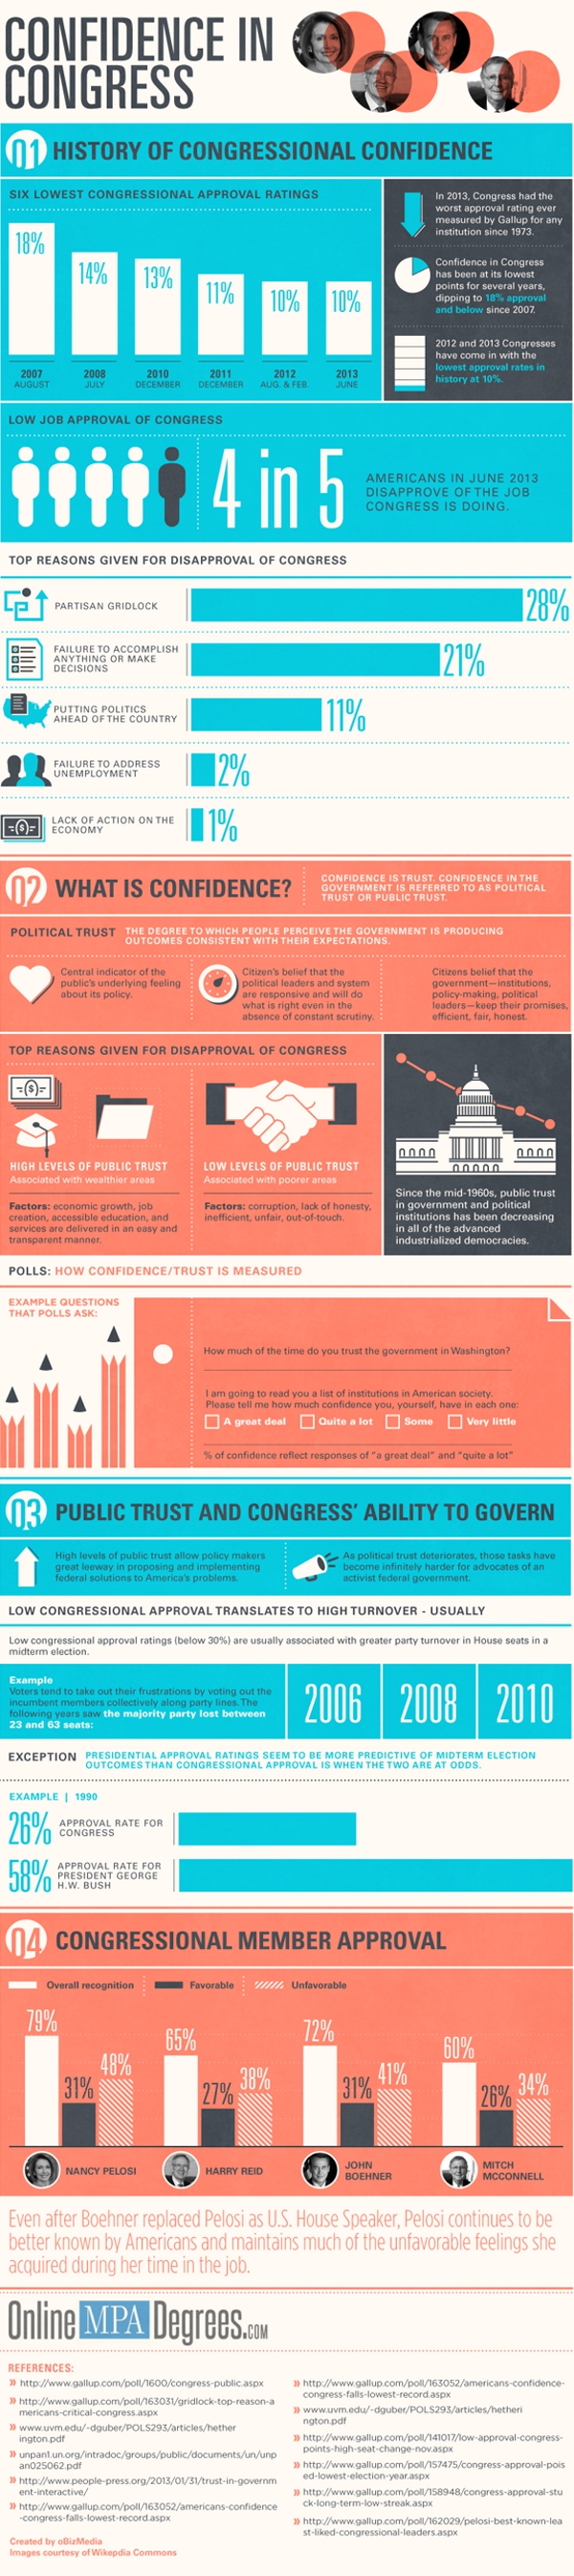 confidence-in-Government-Infographic